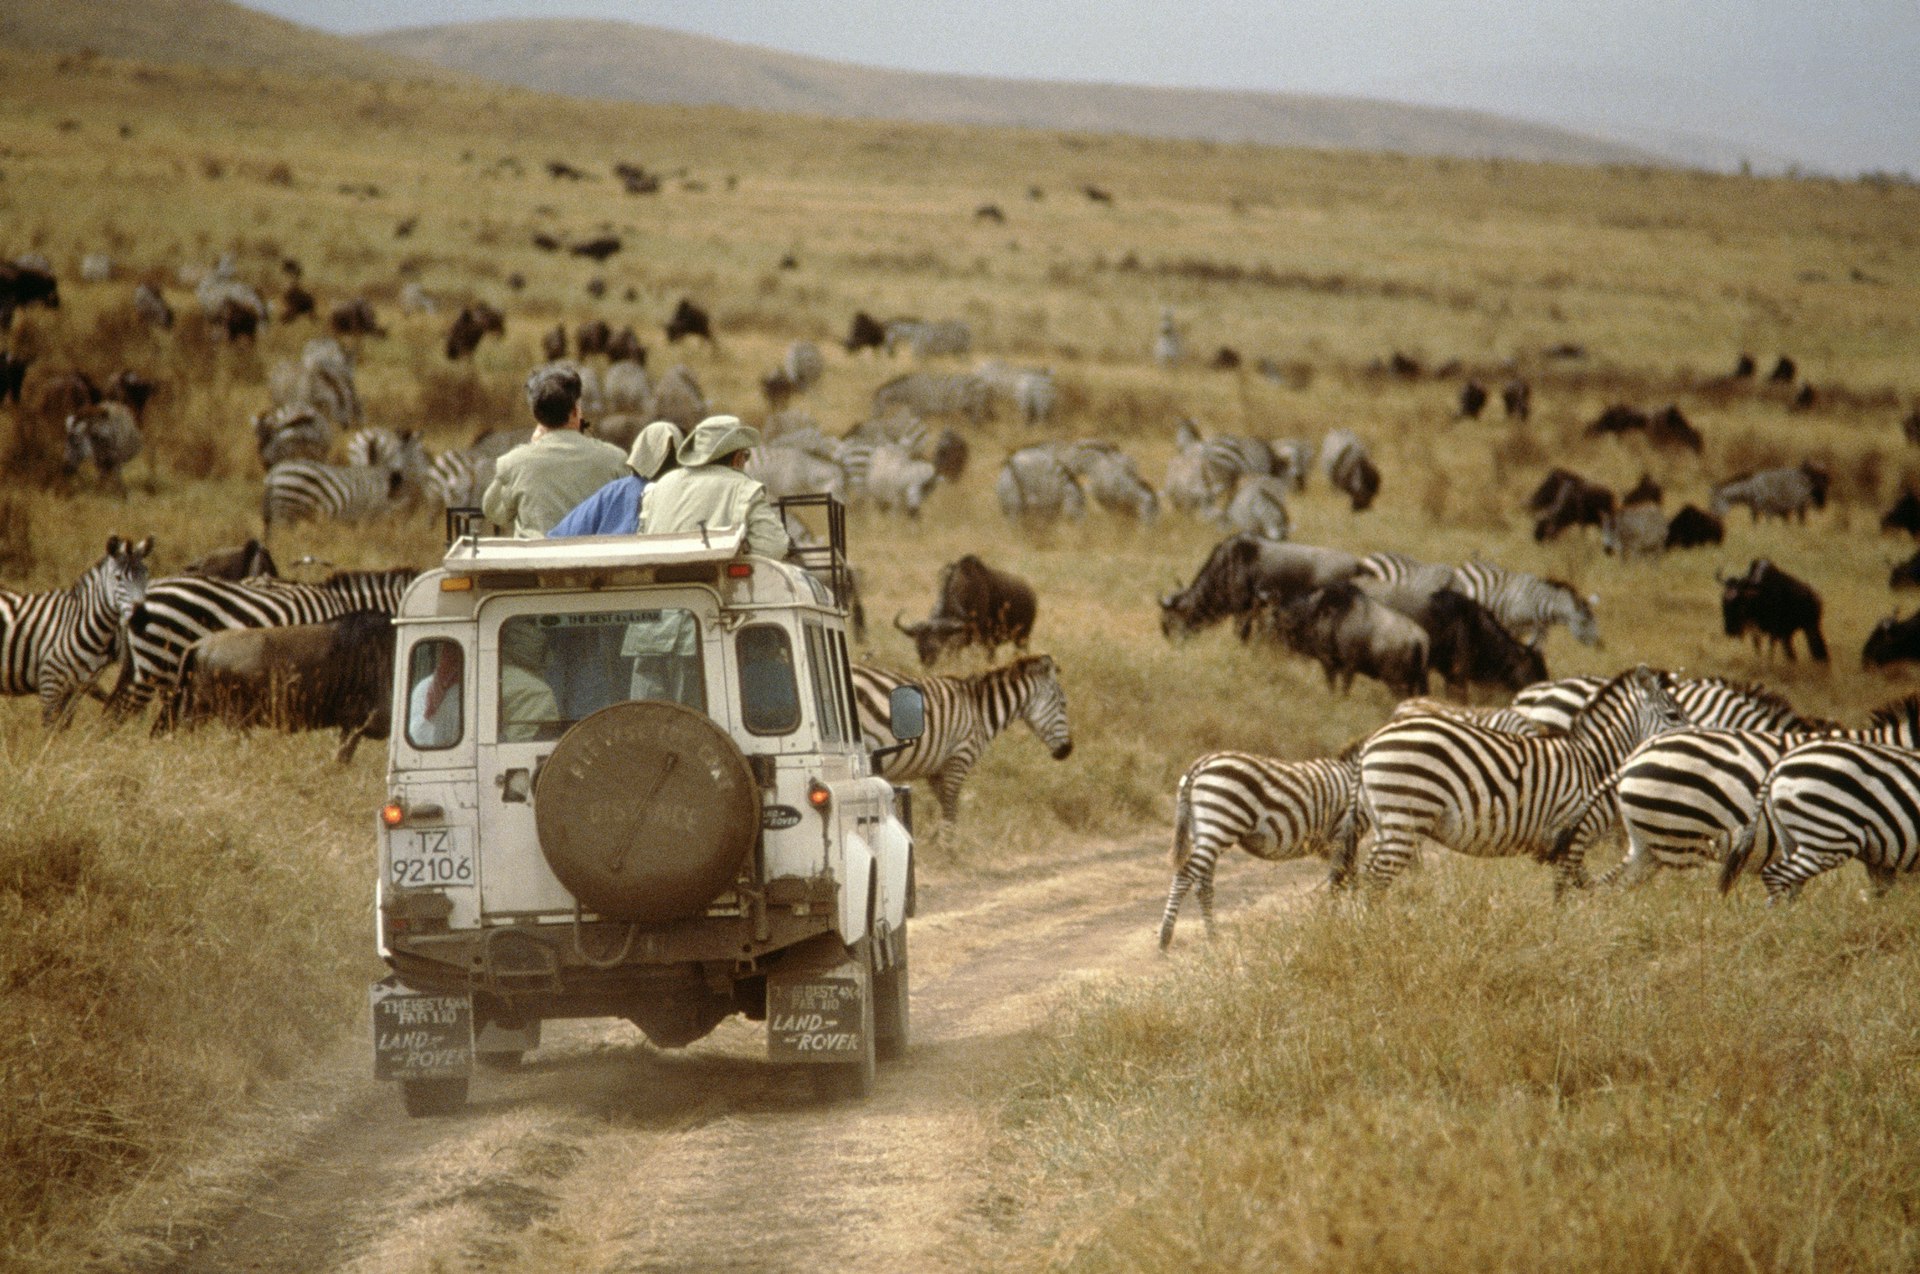 A Land Rover safari vehicle with tourists standing looking out of its roof is stationary on a dirt track as zebras pass in front of it 